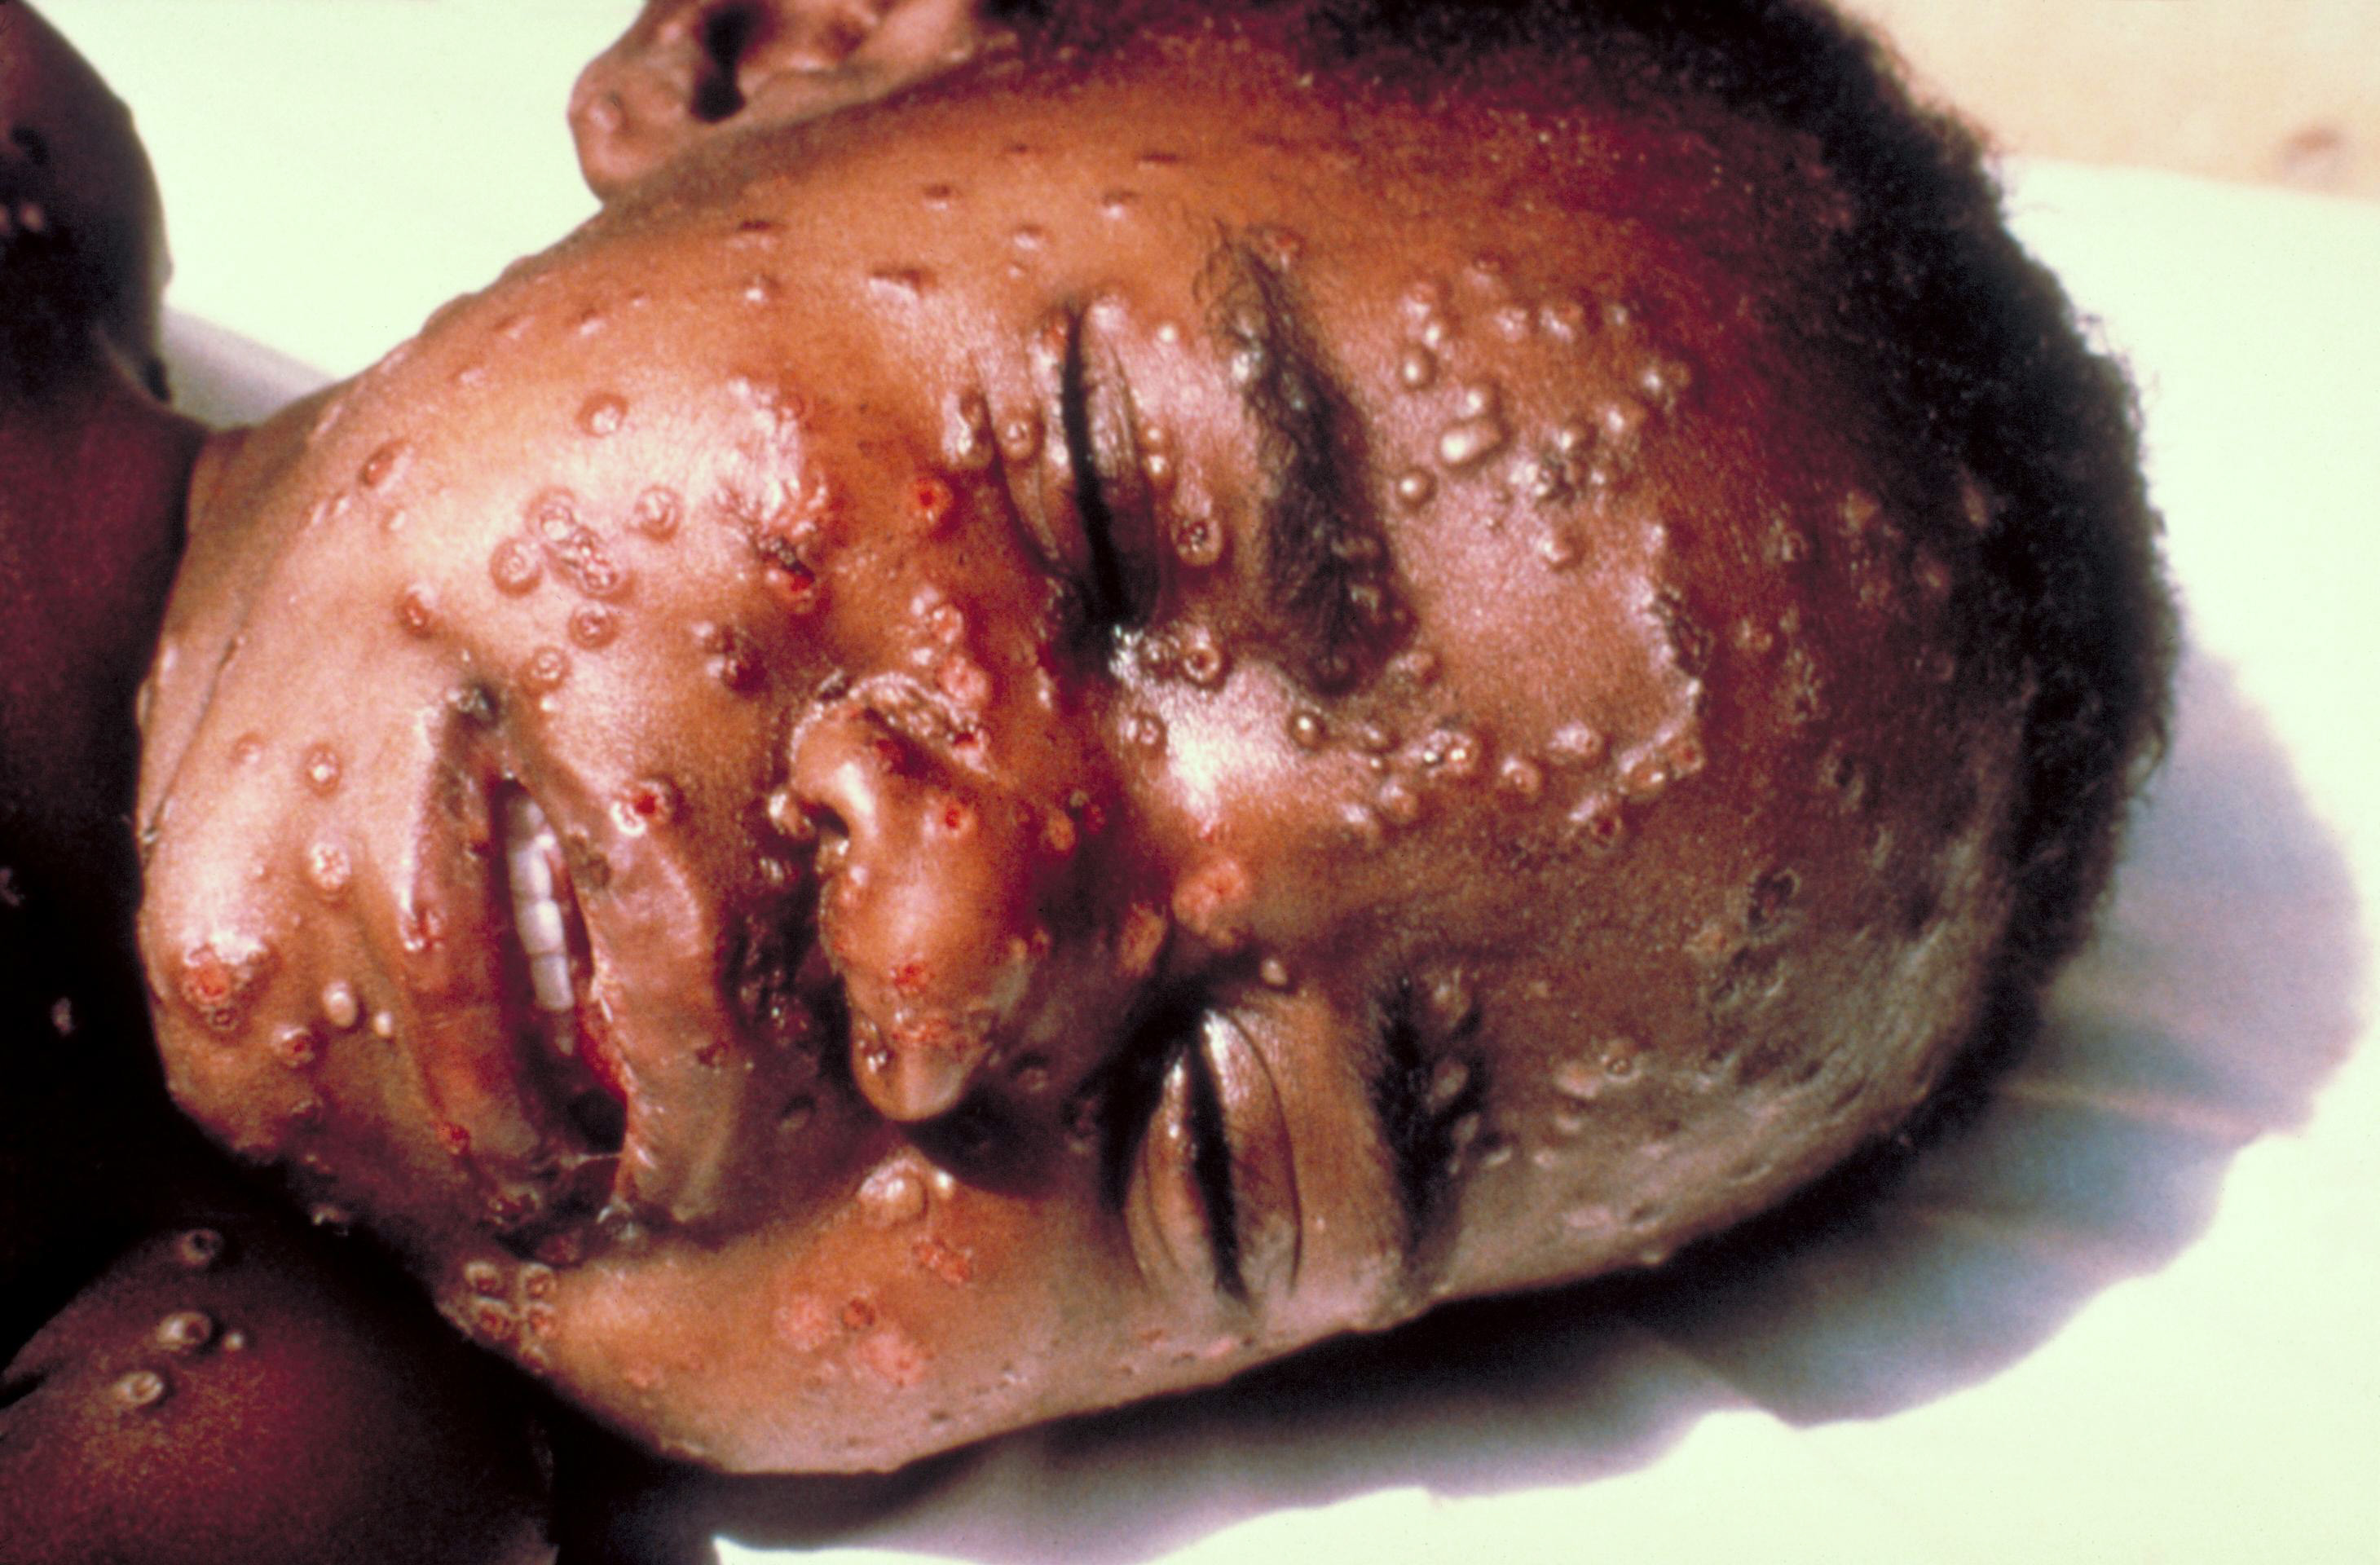 Boy with smallpox on his face